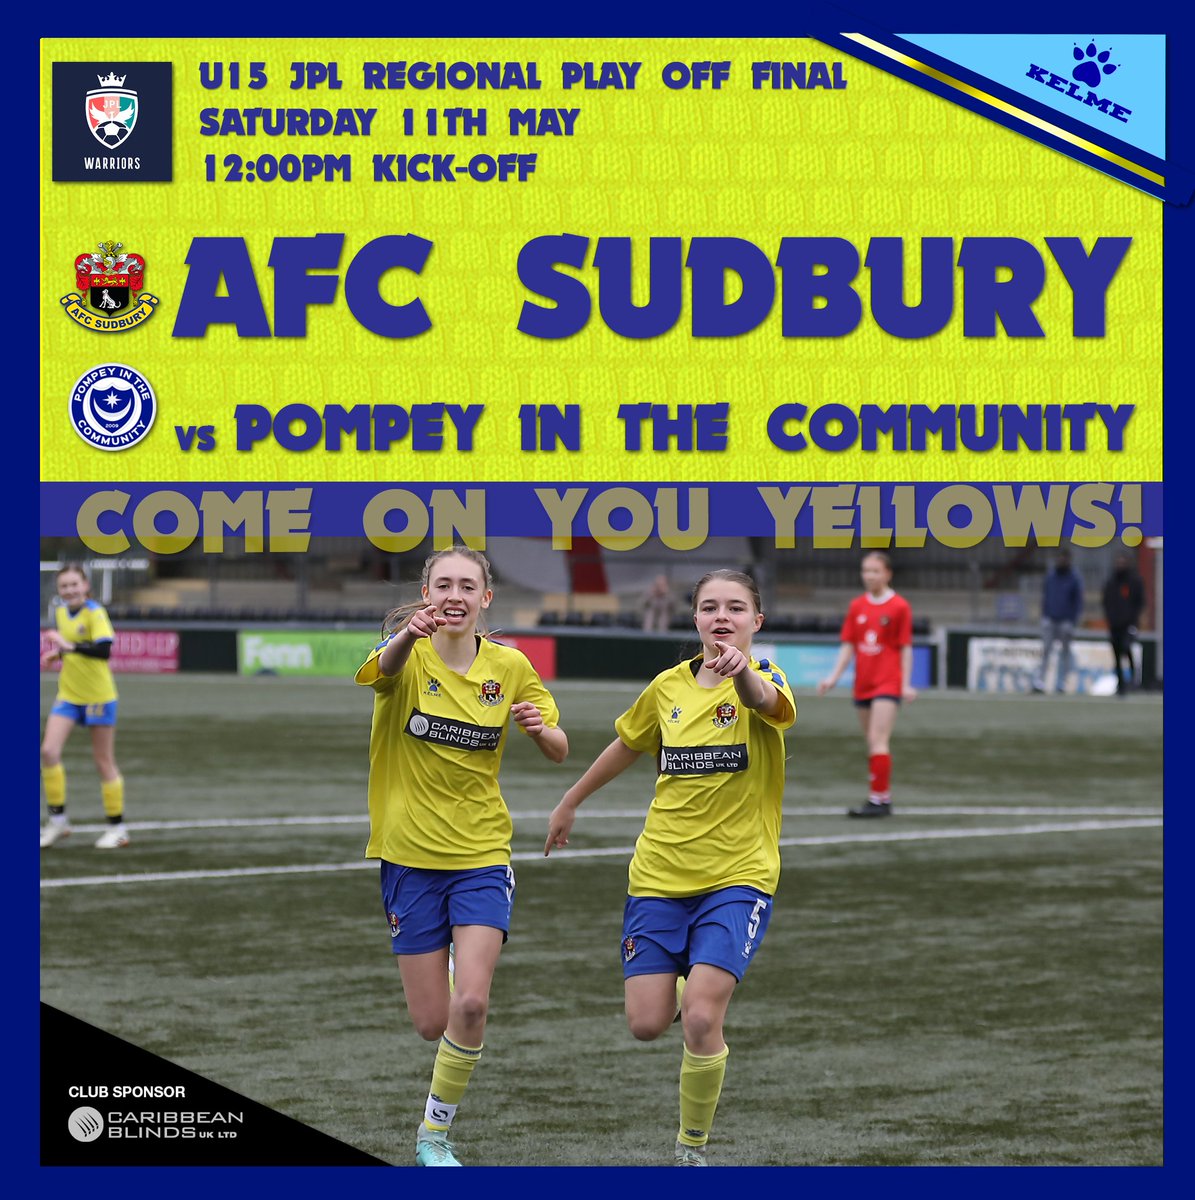 Huge Play Off fixture for our @jpluk girls this Saturday as they take on @PompeyITC down at the MEL Group Stadium. Kitchen and bar open and a sunny day awaits! See you there Yellows